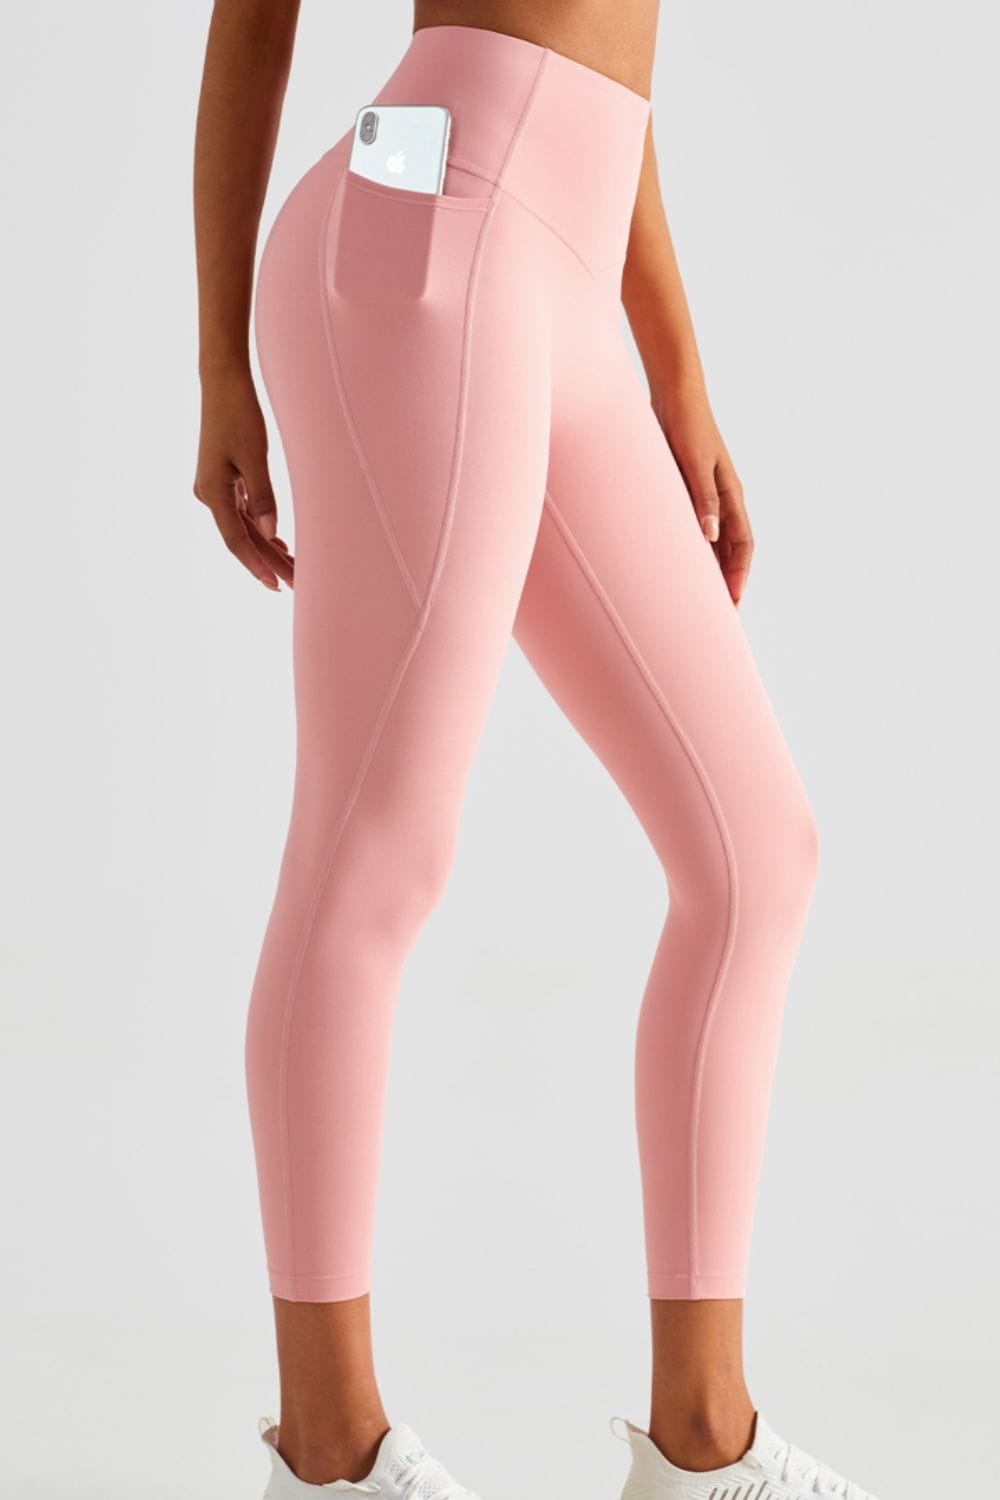 Wide Waistband Sports Leggings with Pockets - Runway Frenzy 